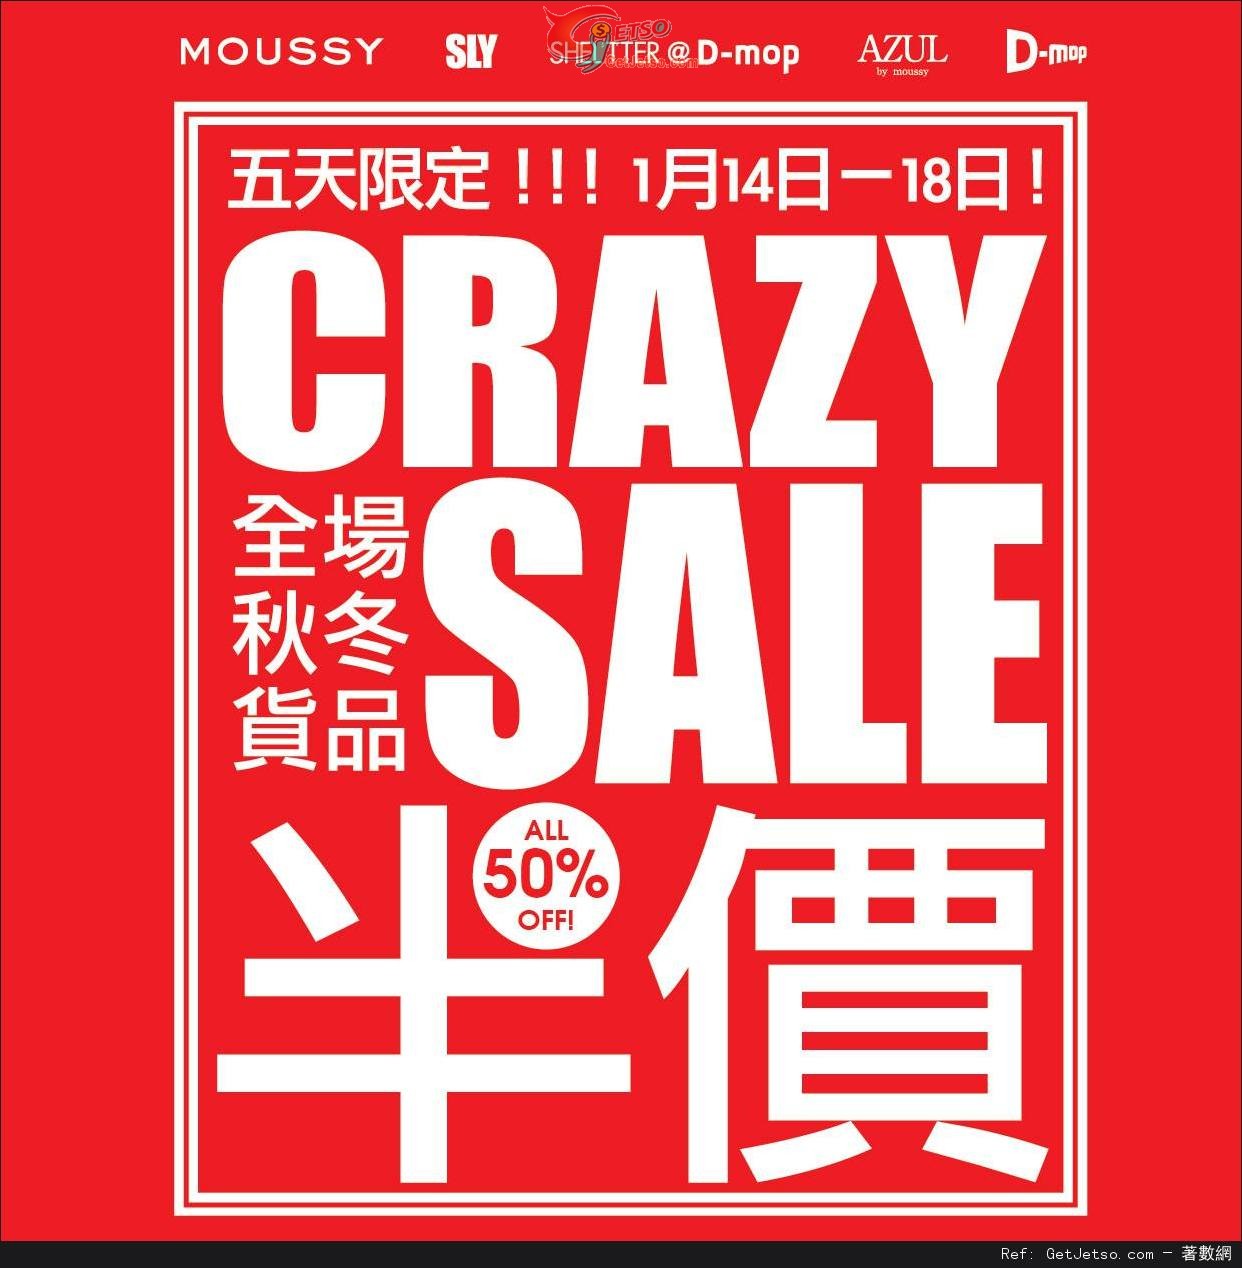 M​oussy/​SLY/​D-mop Crazy Sale​全場半價優惠(至15年1月18日)圖片1